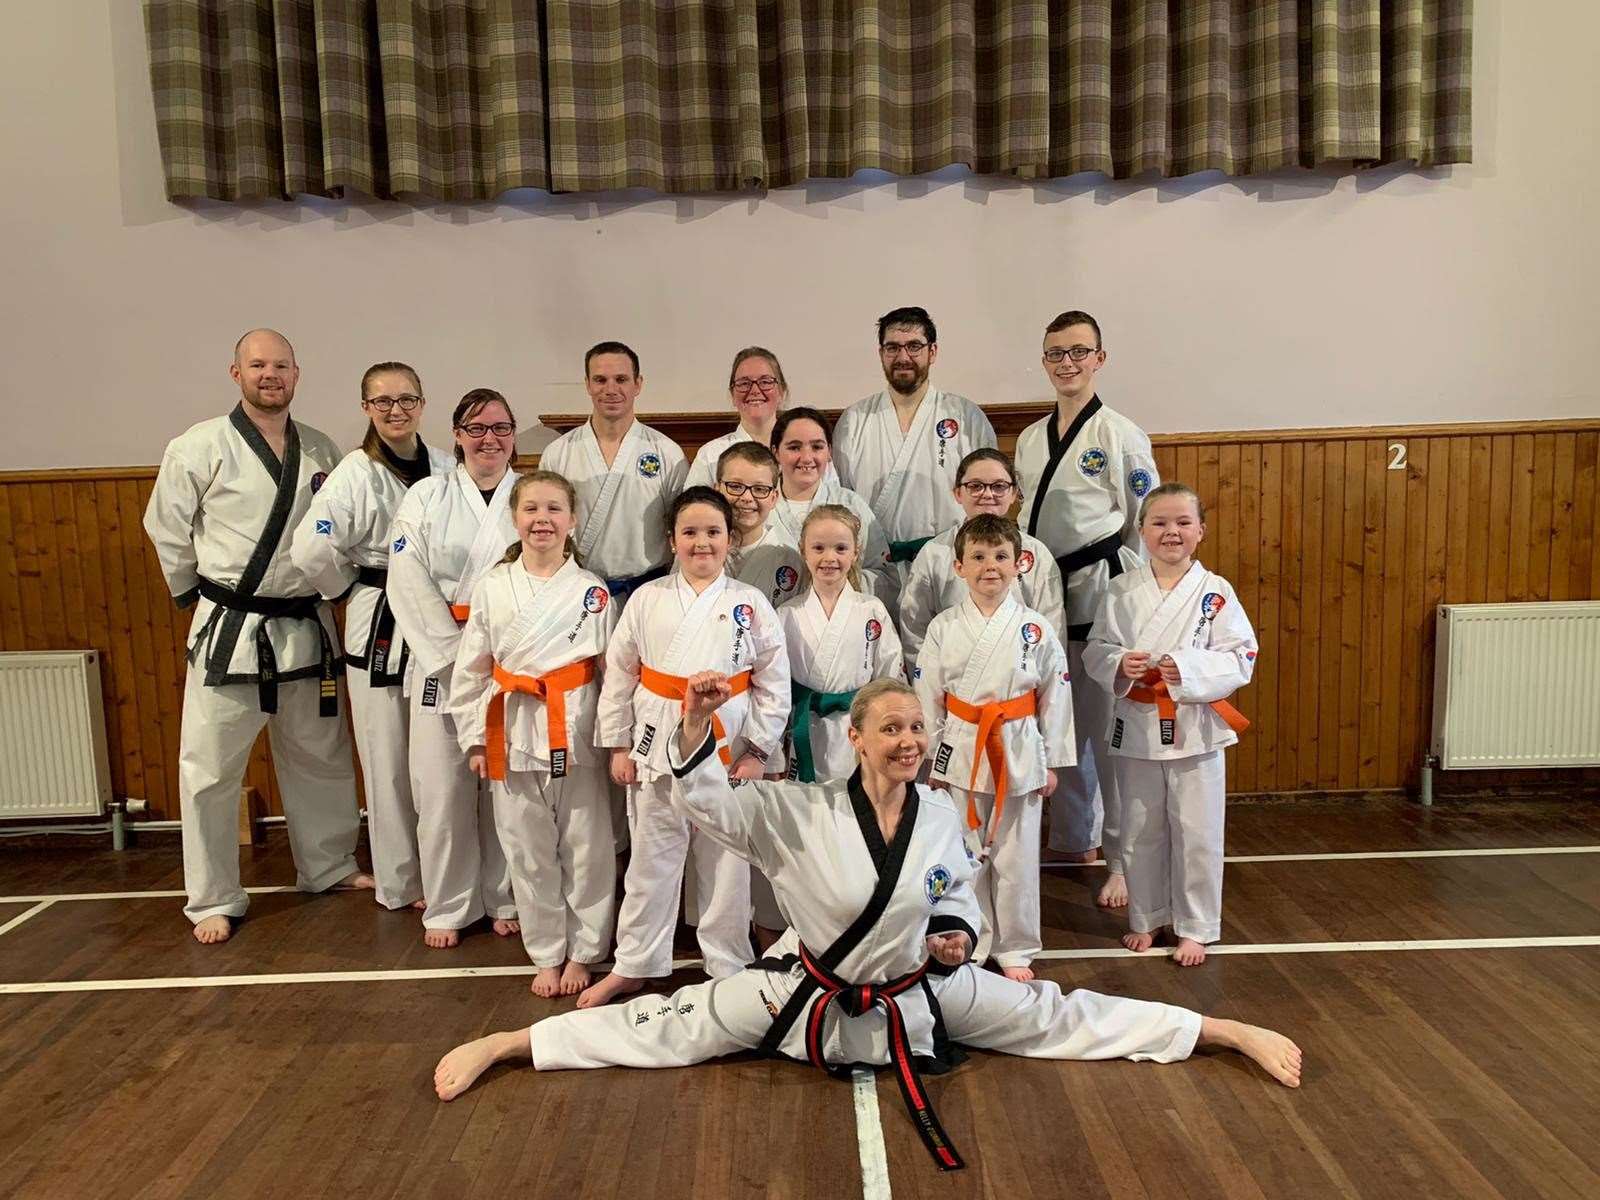 Club instructors Stephen Mezals and Arizona Morence (back, left) and Master Kelly O’Connor (front) with the successful Caithness students and guests from Inverness Tang Soo Do.